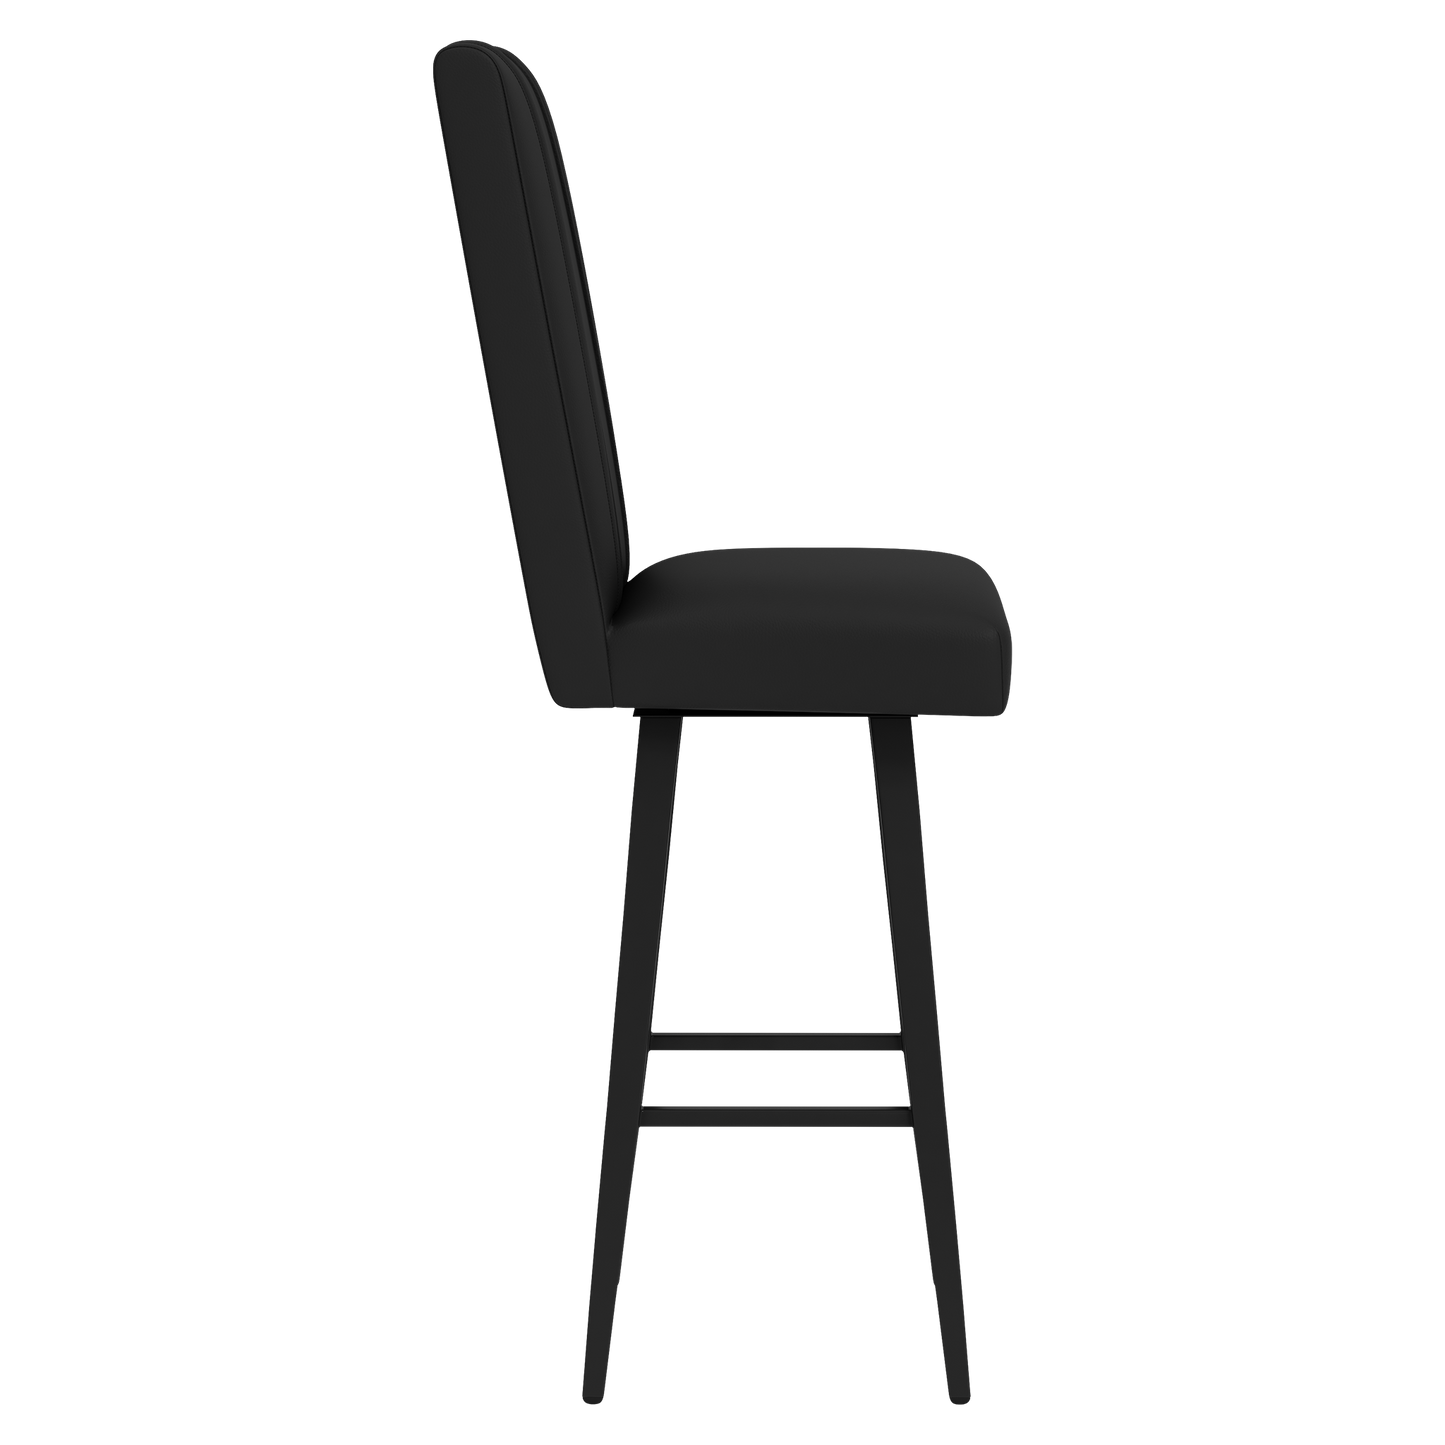 Swivel Bar Stool 2000 with Notre Dame Secondary Logo